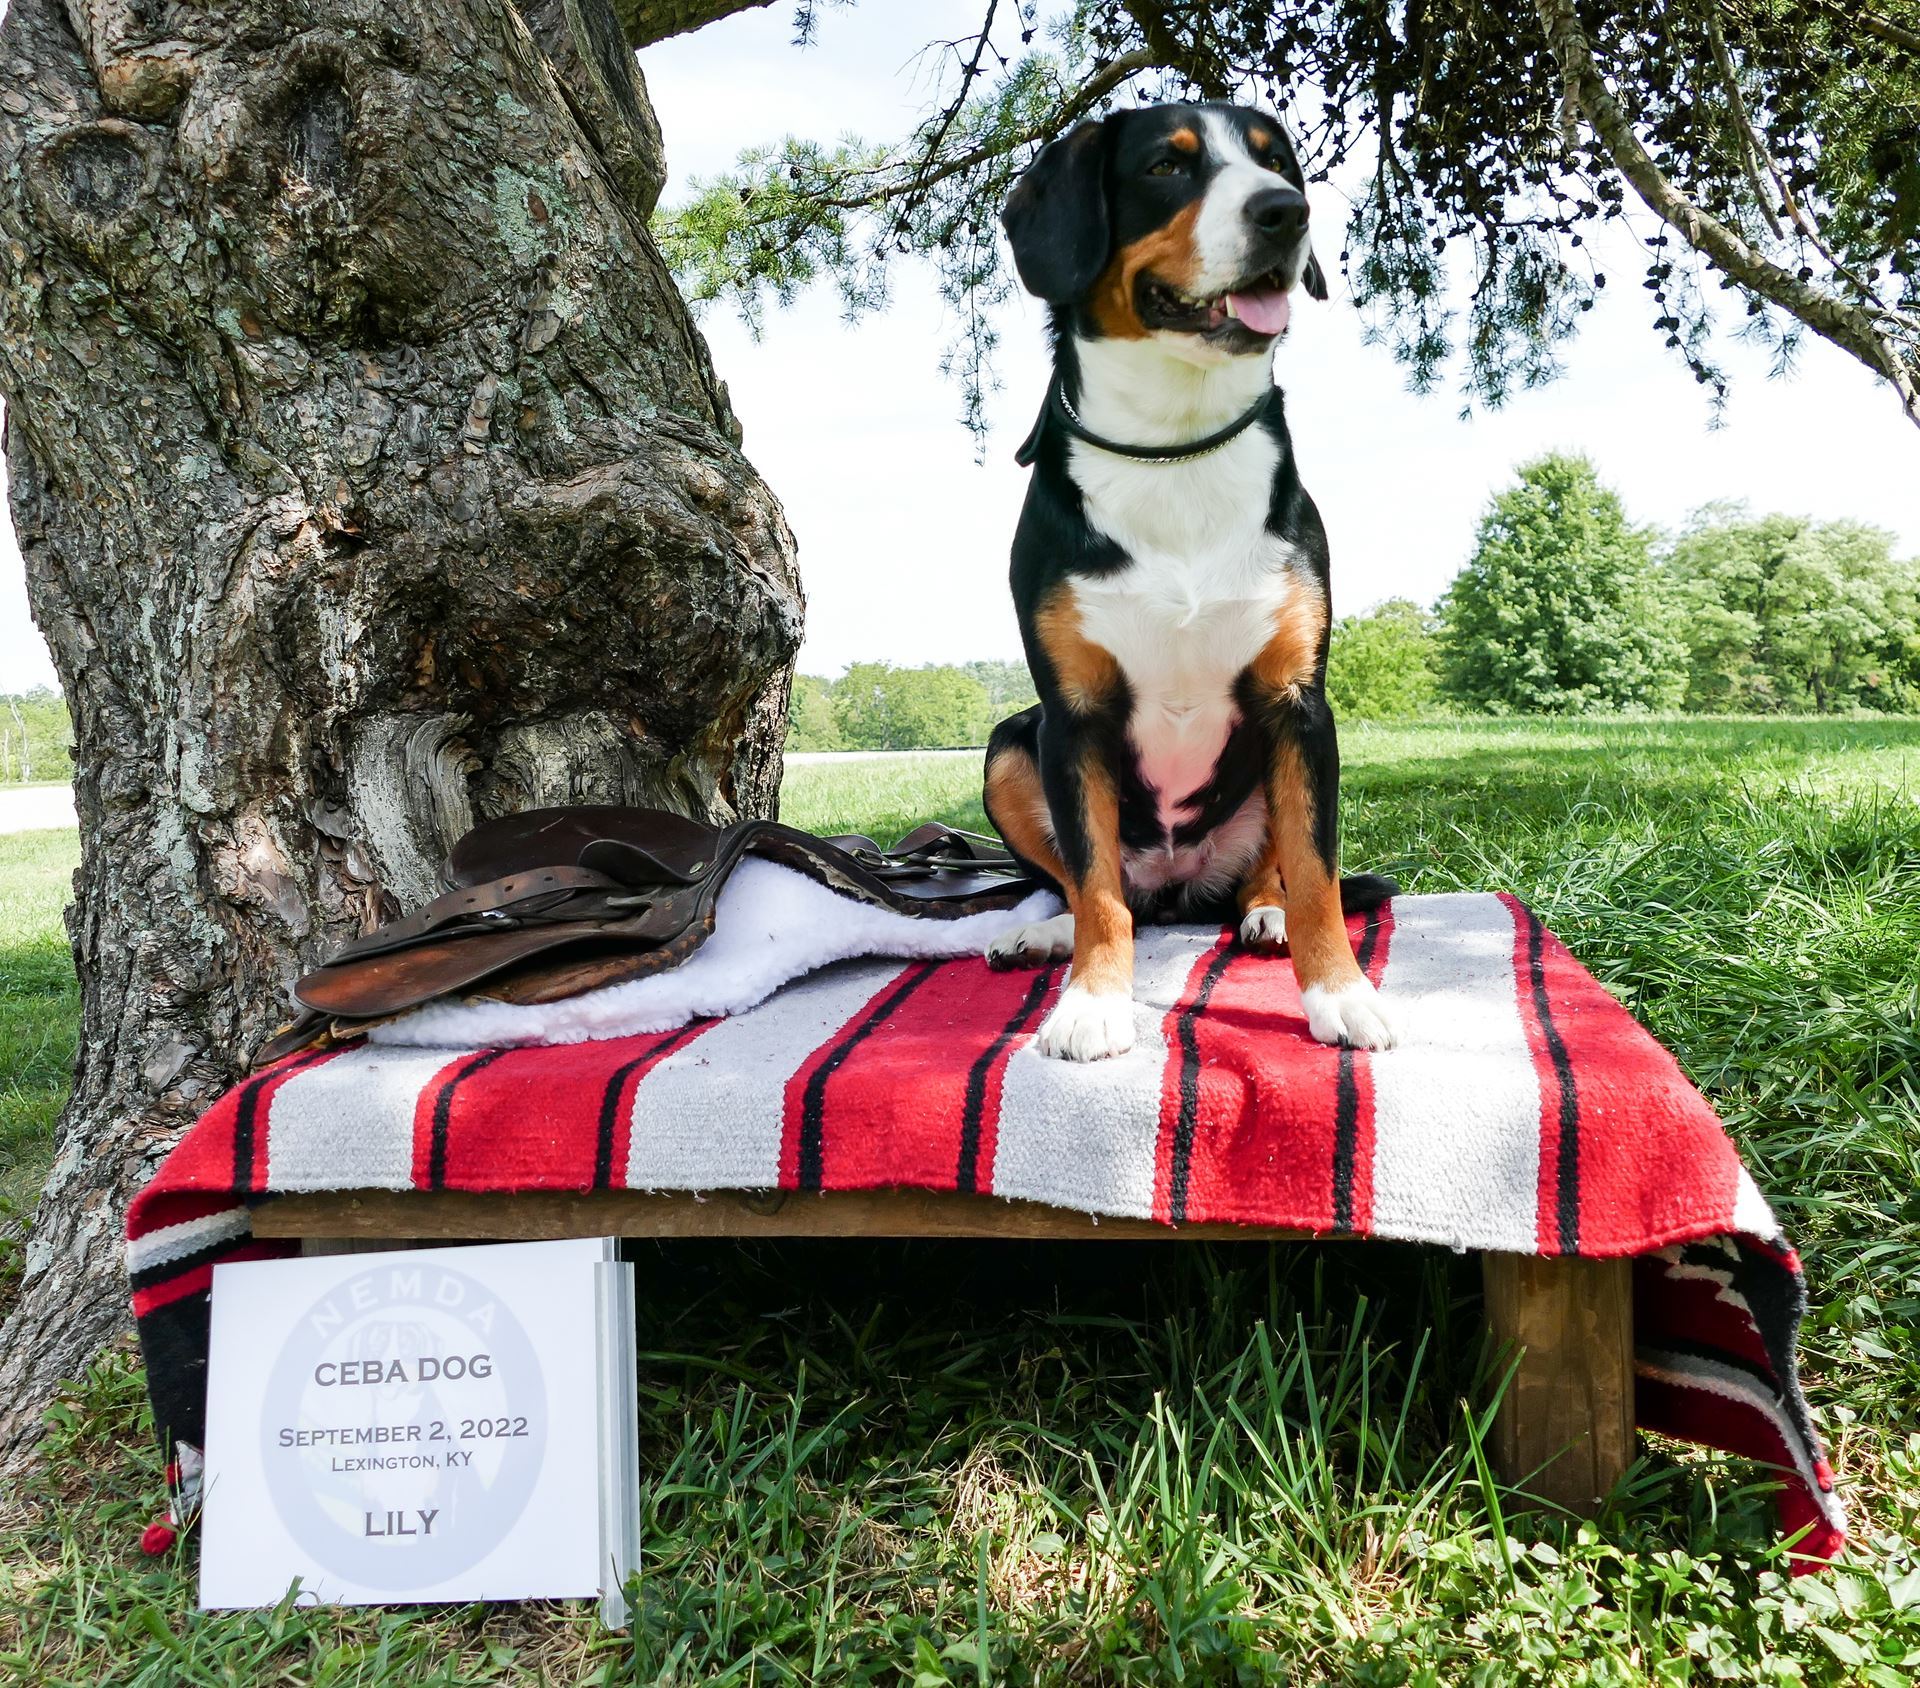 An Entlebucher sitting on a red saddle blanket with a saddle beside her under a pine tree. A sign says CEBA dog September 2, 2022 Lexington KY Liily